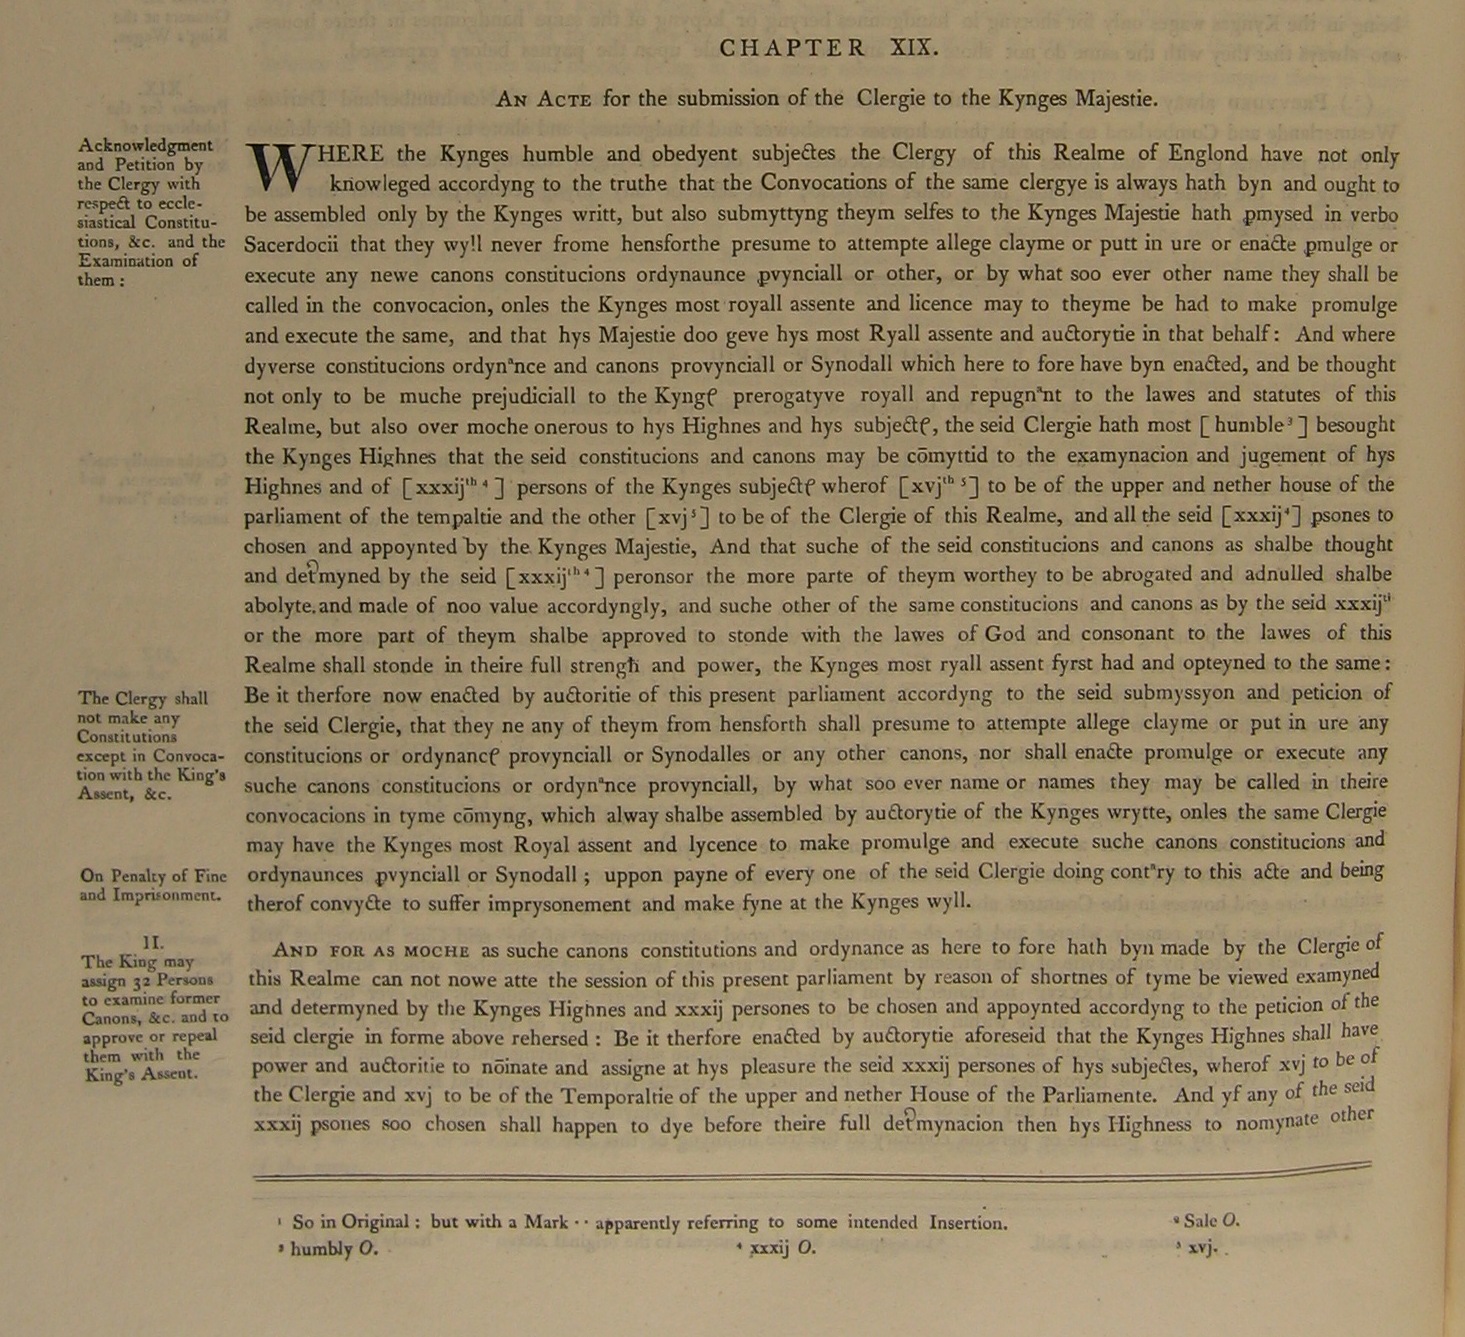 Image of 25 Henry 8, c. 19 (page 1 of 2). Click for larger image.